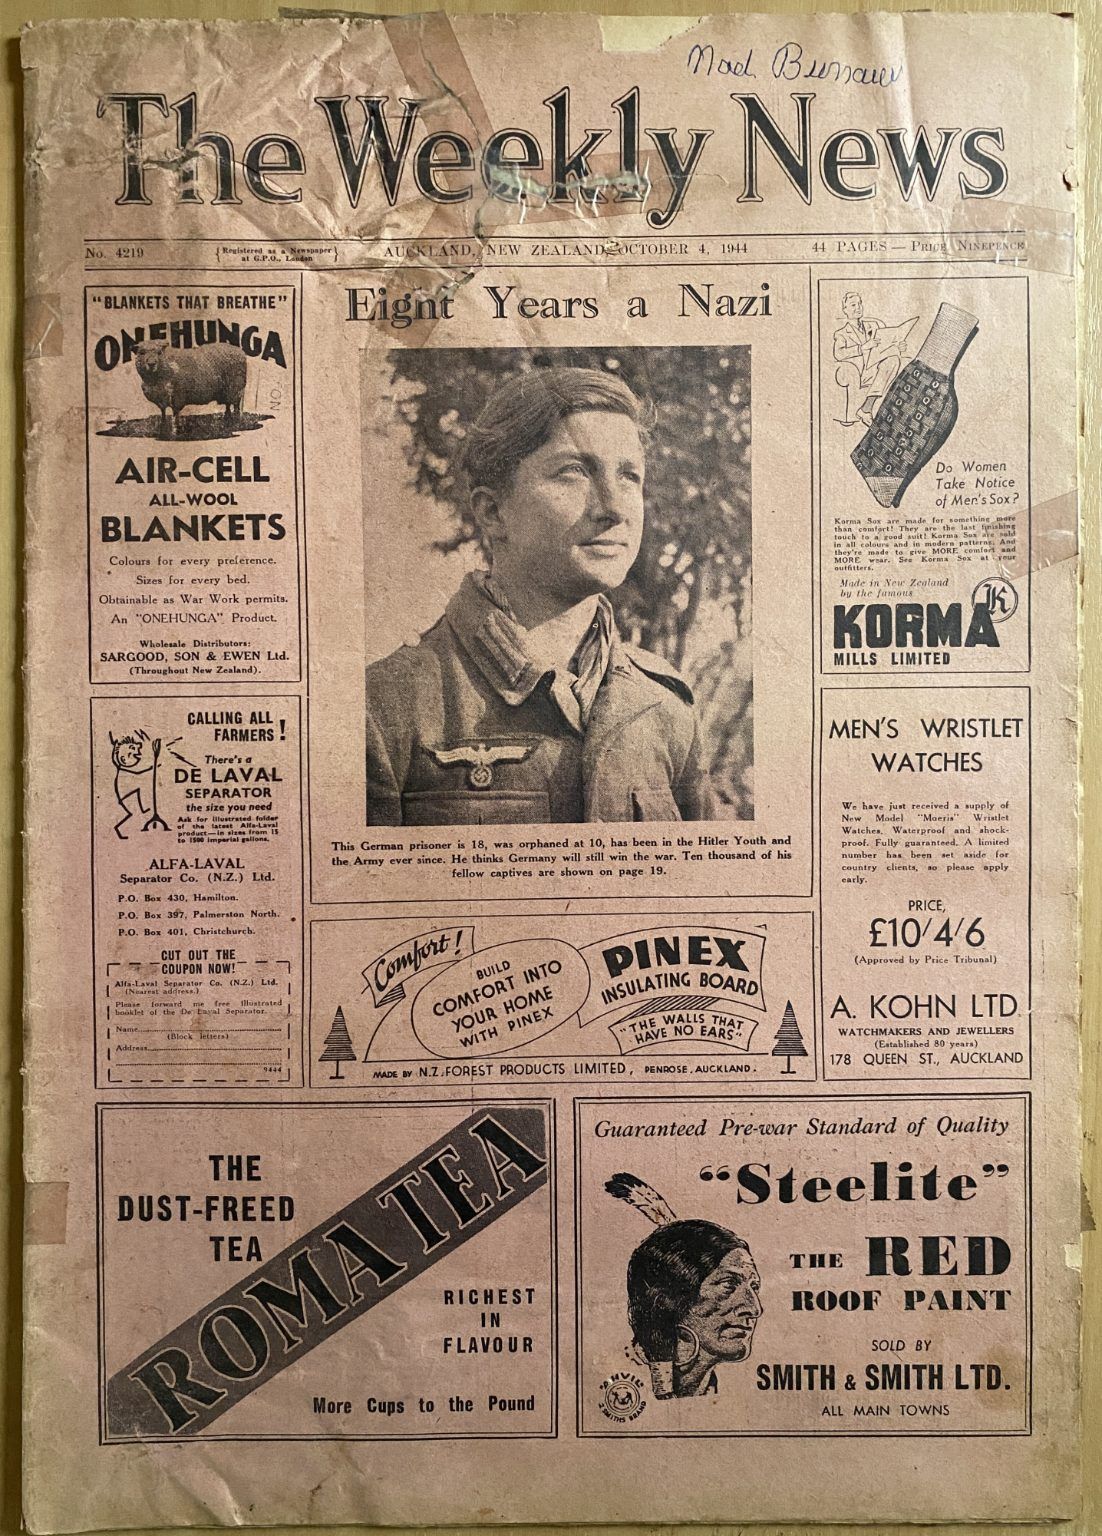 OLD NEWSPAPER: The Weekly News - No. 4219, 4 October 1944